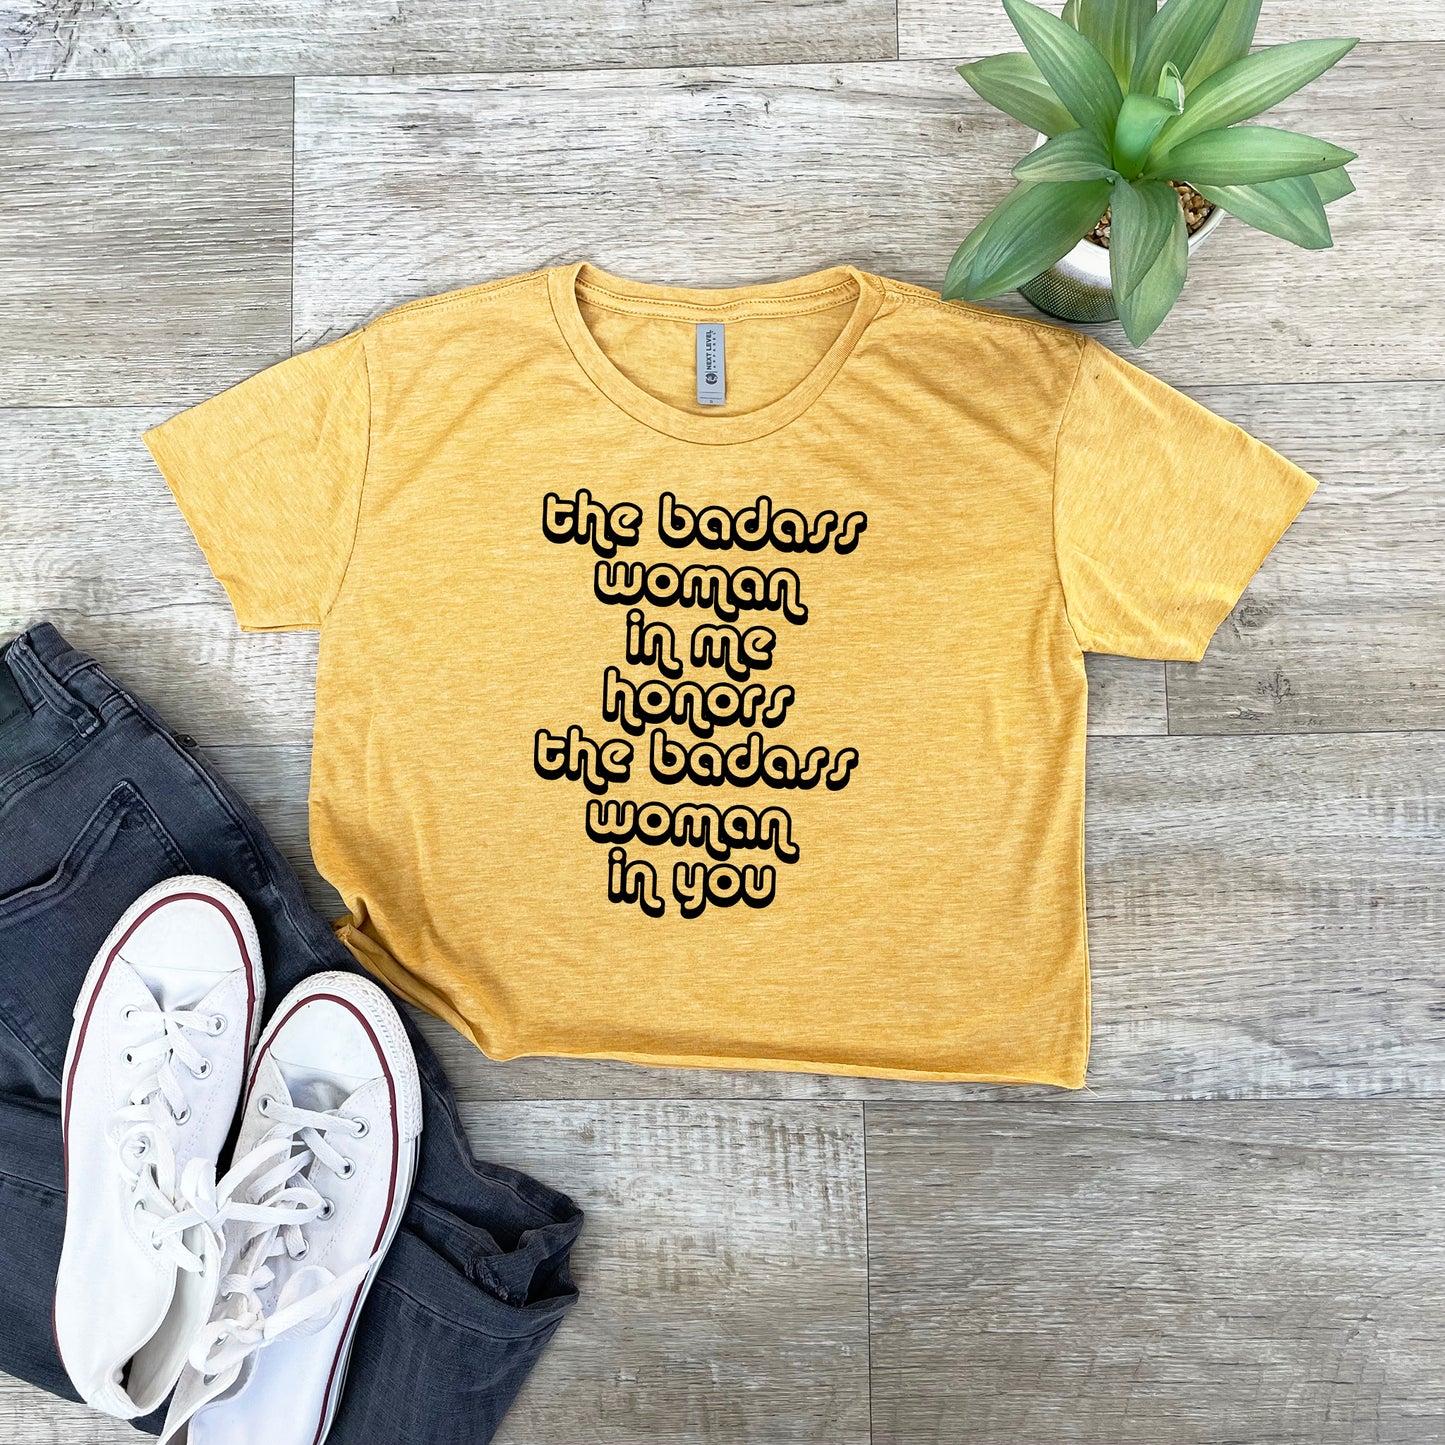 The Badass Woman in Me Honors the Badass Woman in You - Women's Crop Tee - Heather Gray or Gold